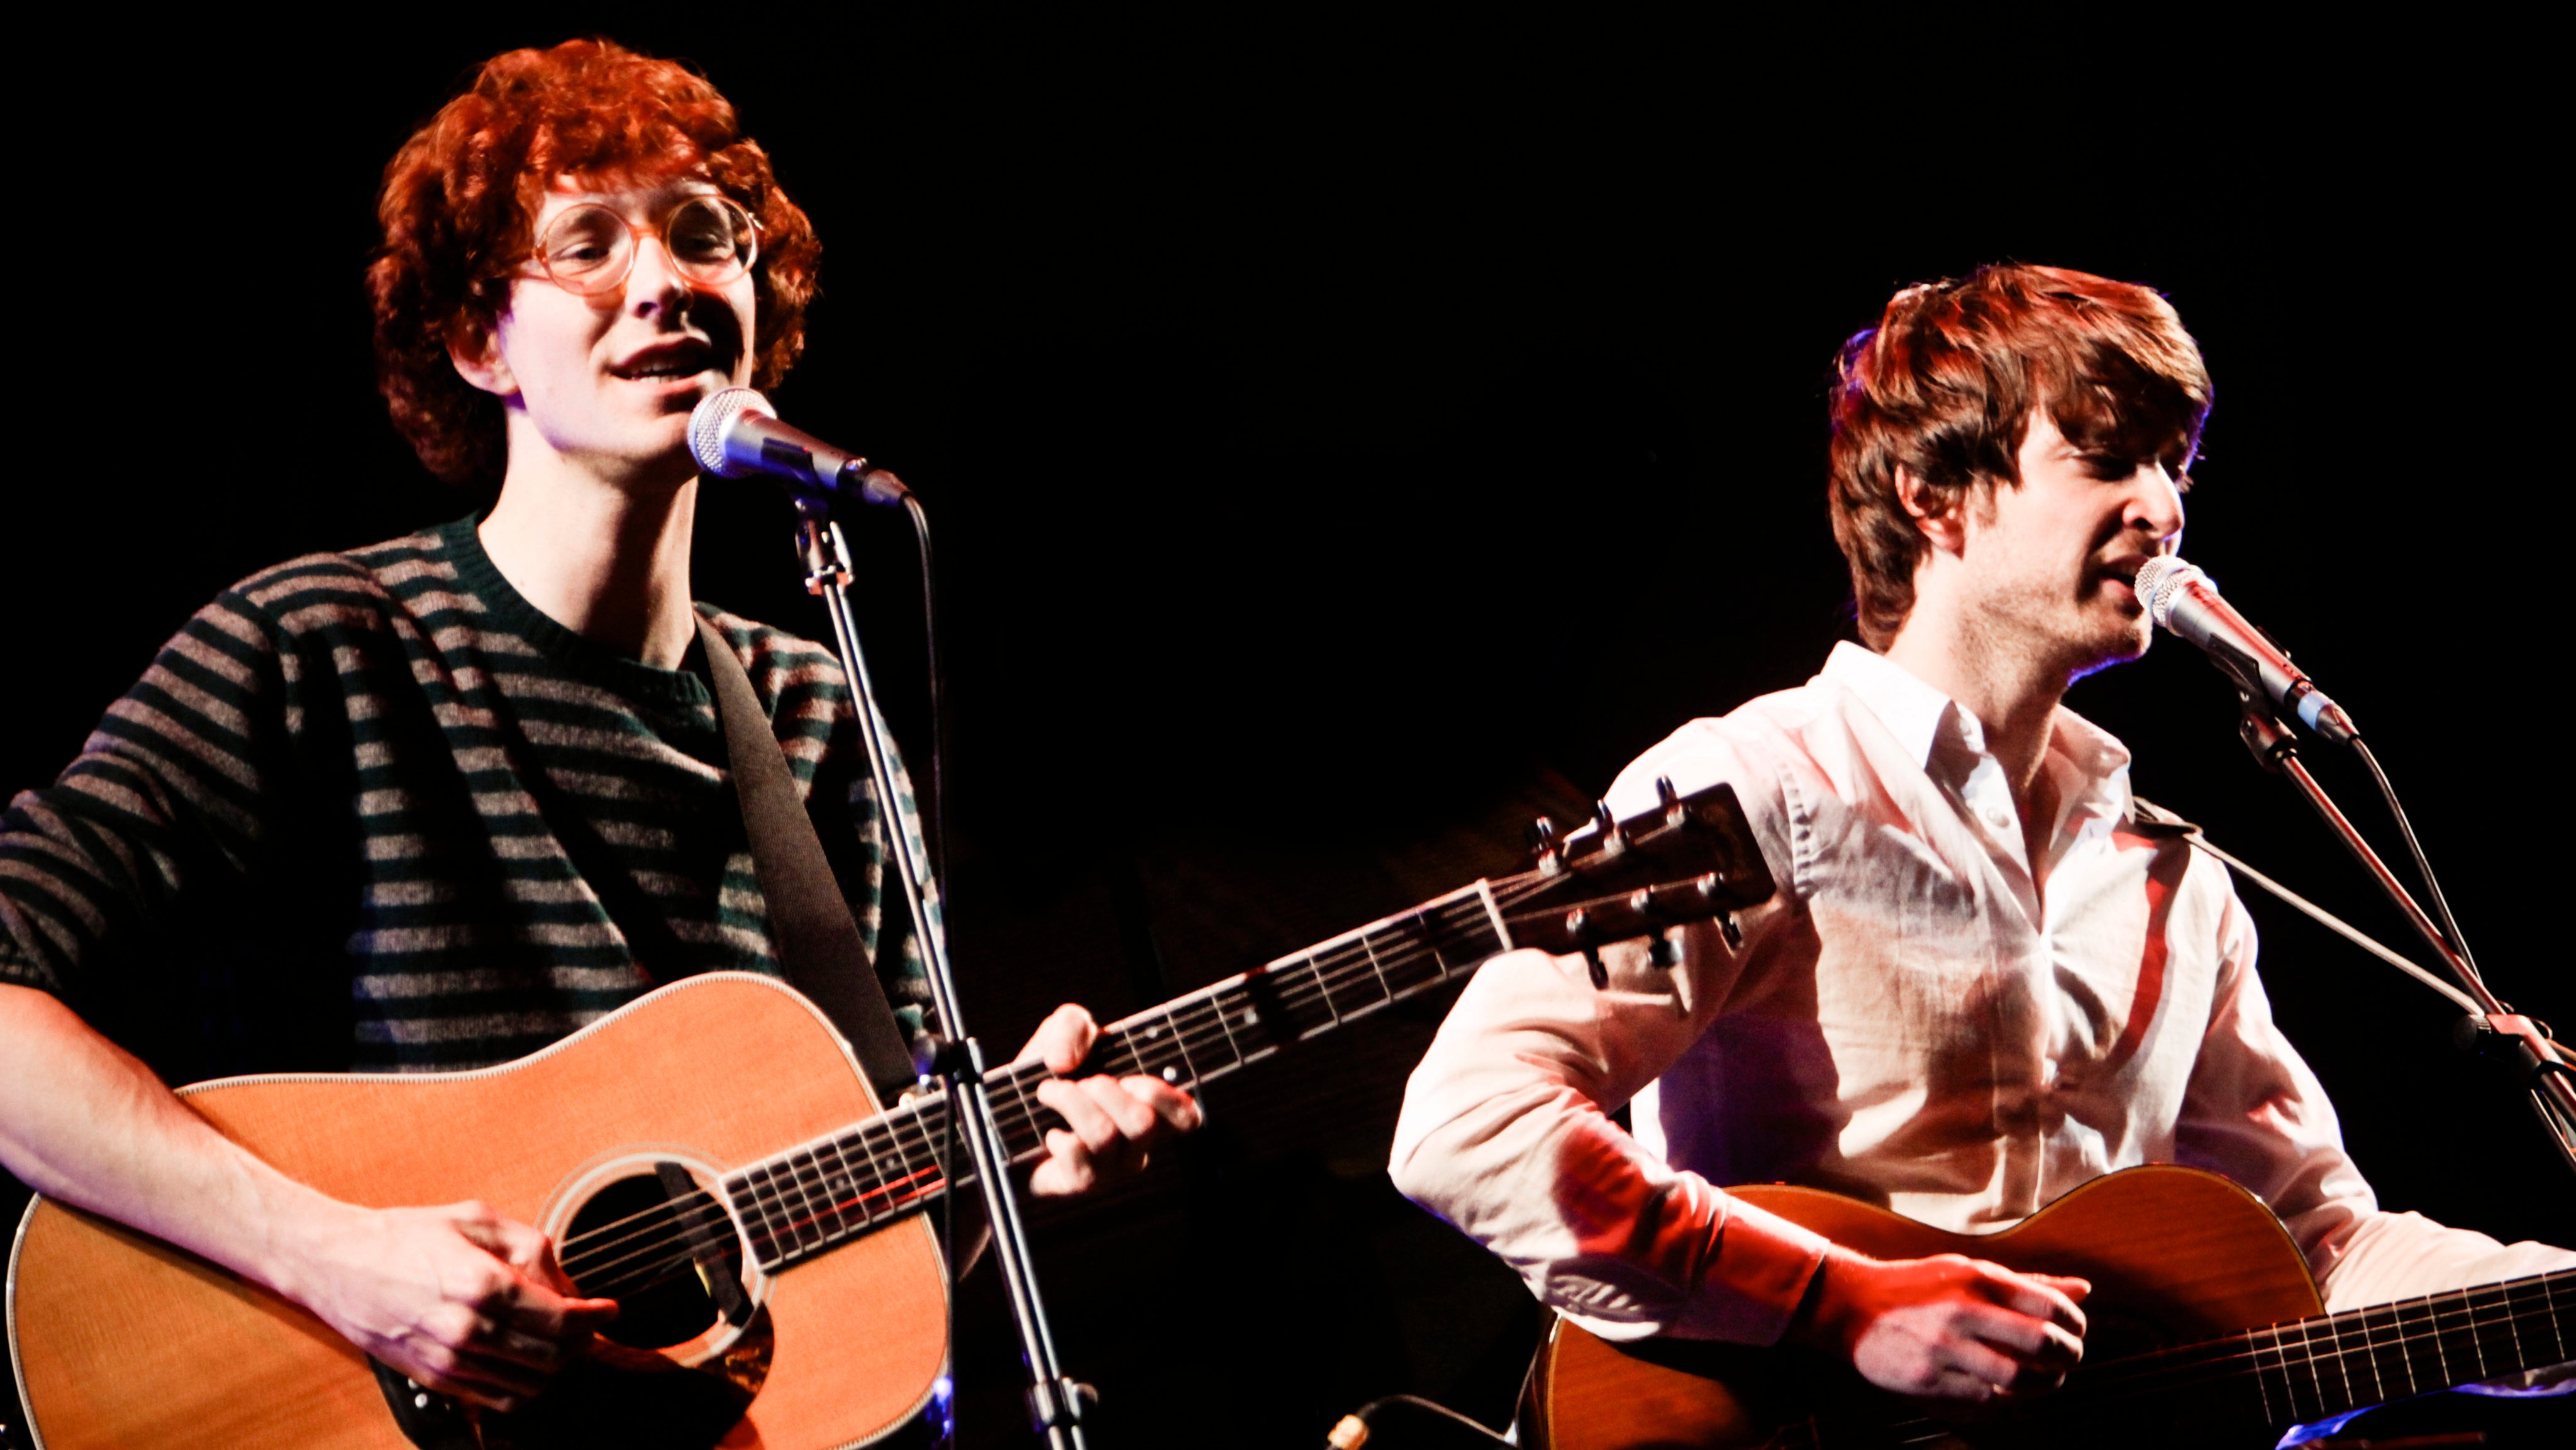 Italy - Music - Kings of Convenience - Concert in Rome